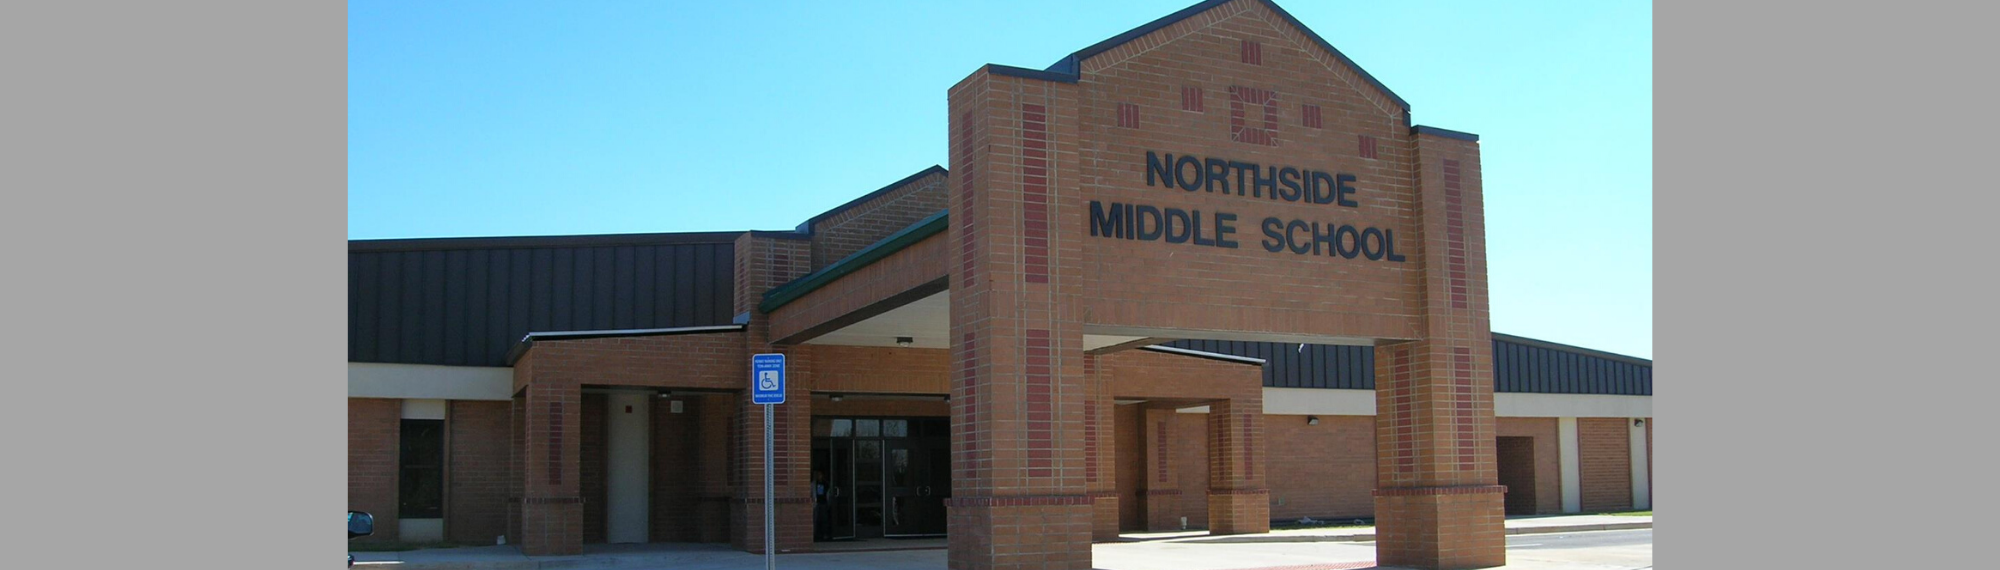 NMS front of school